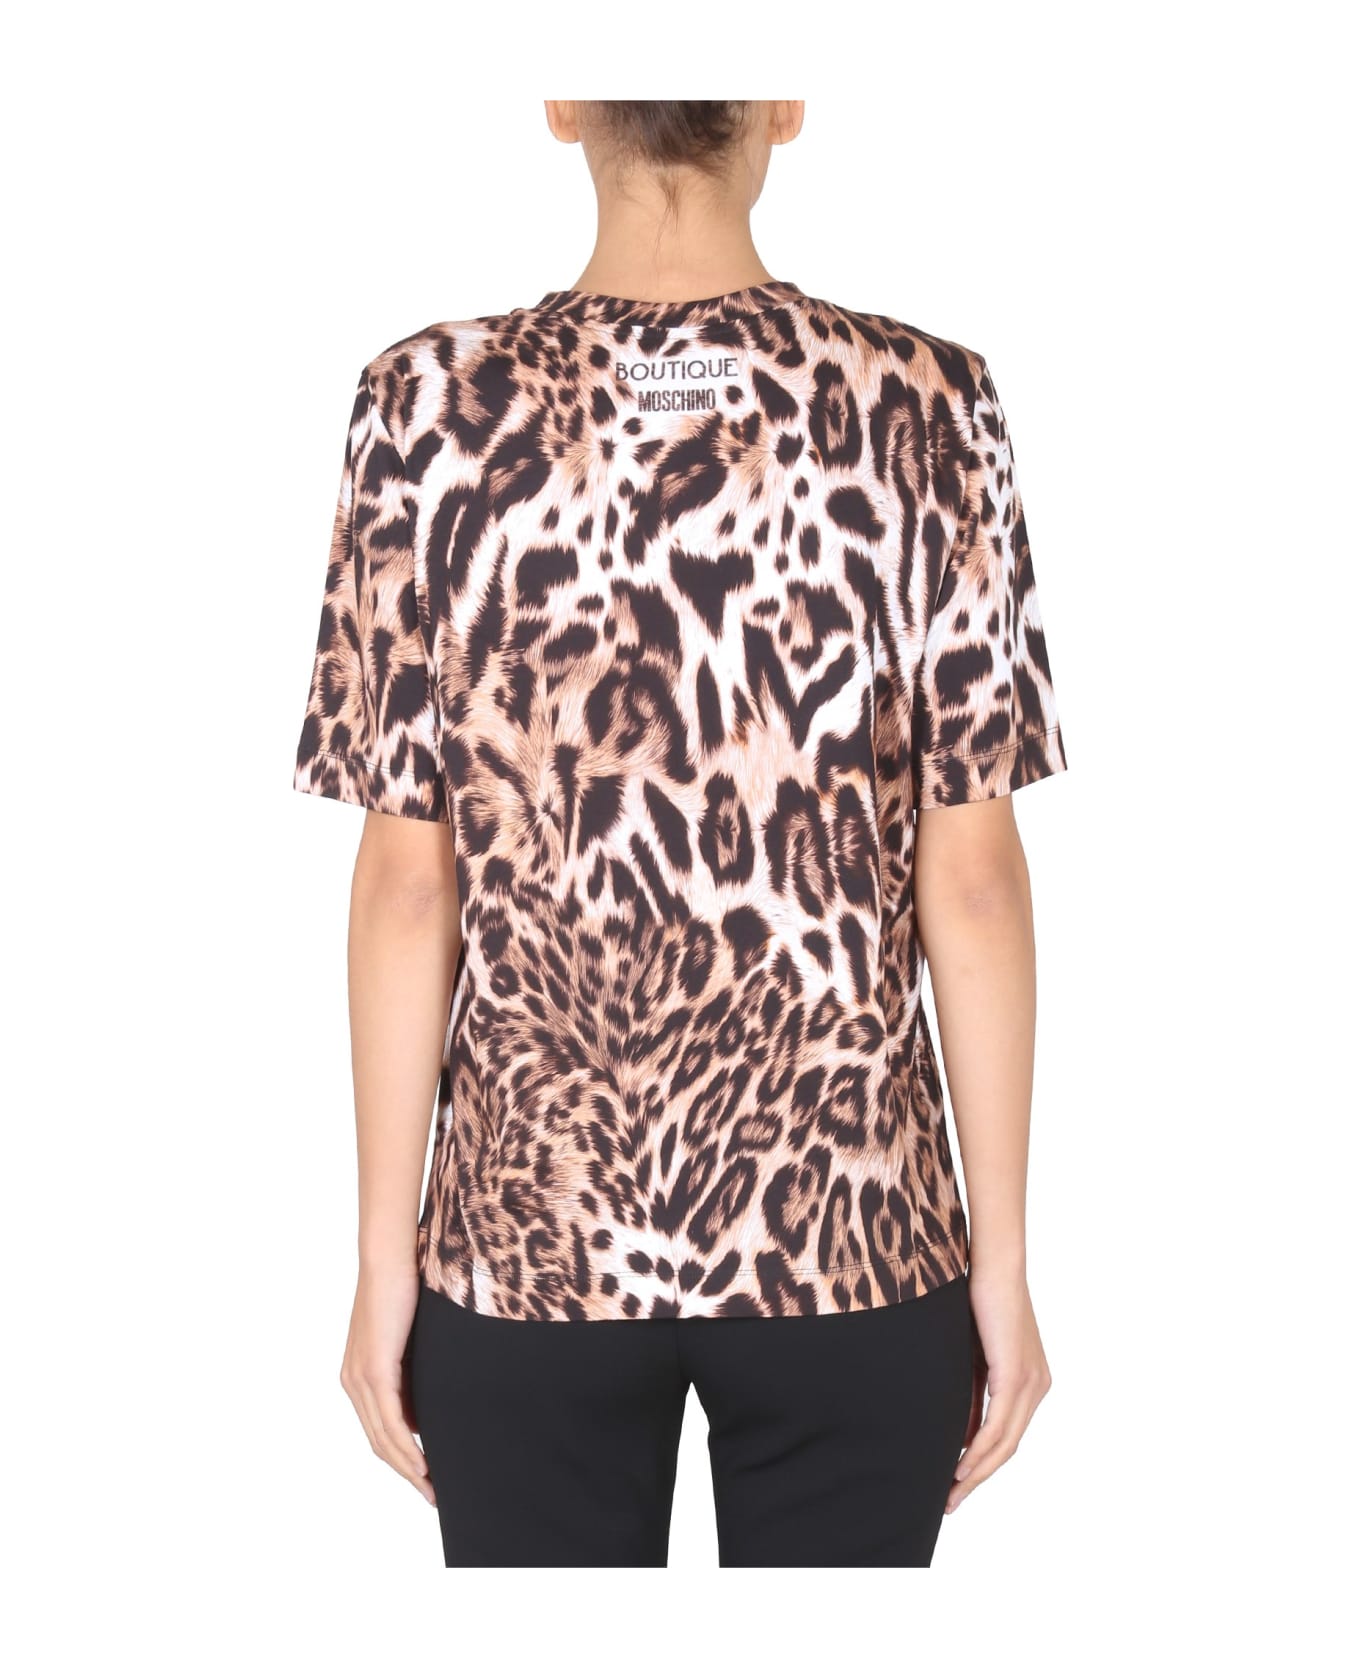 Boutique Moschino Animal Print T-shirt - MULTICOLOR